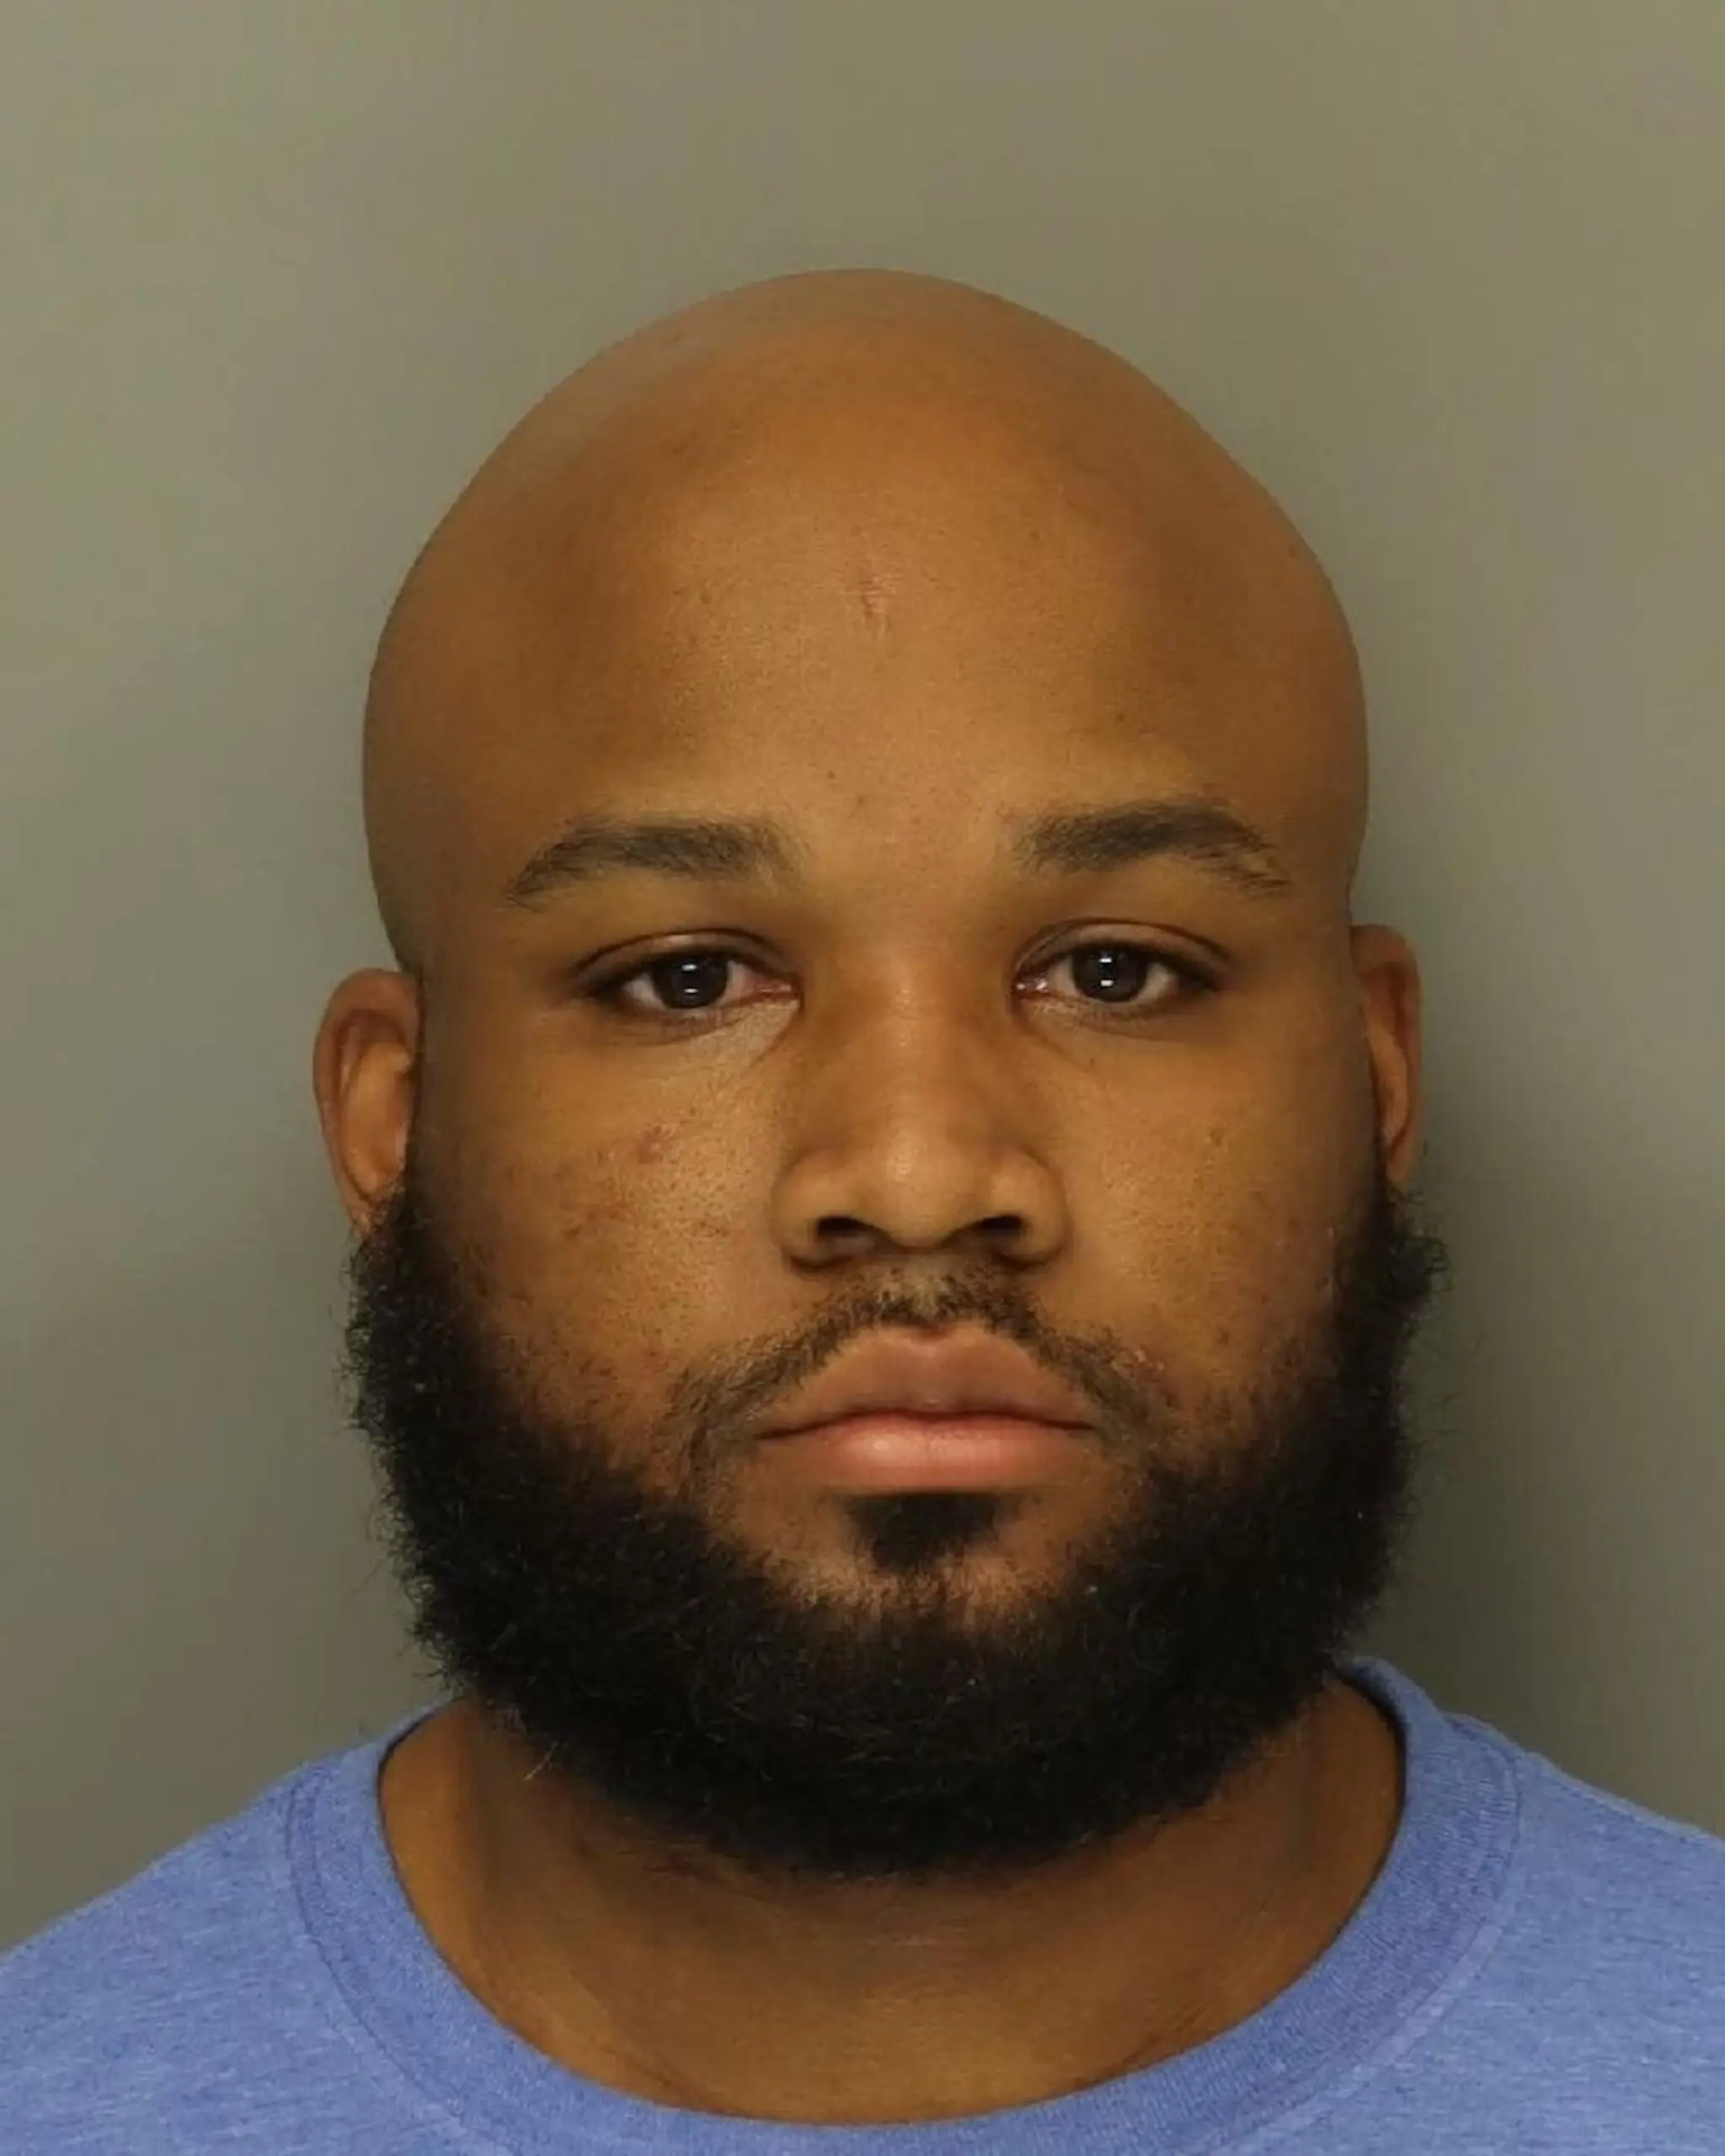 PHOTO: This Baltimore County Police Department booking photo features Dazhon Darien, which was released.